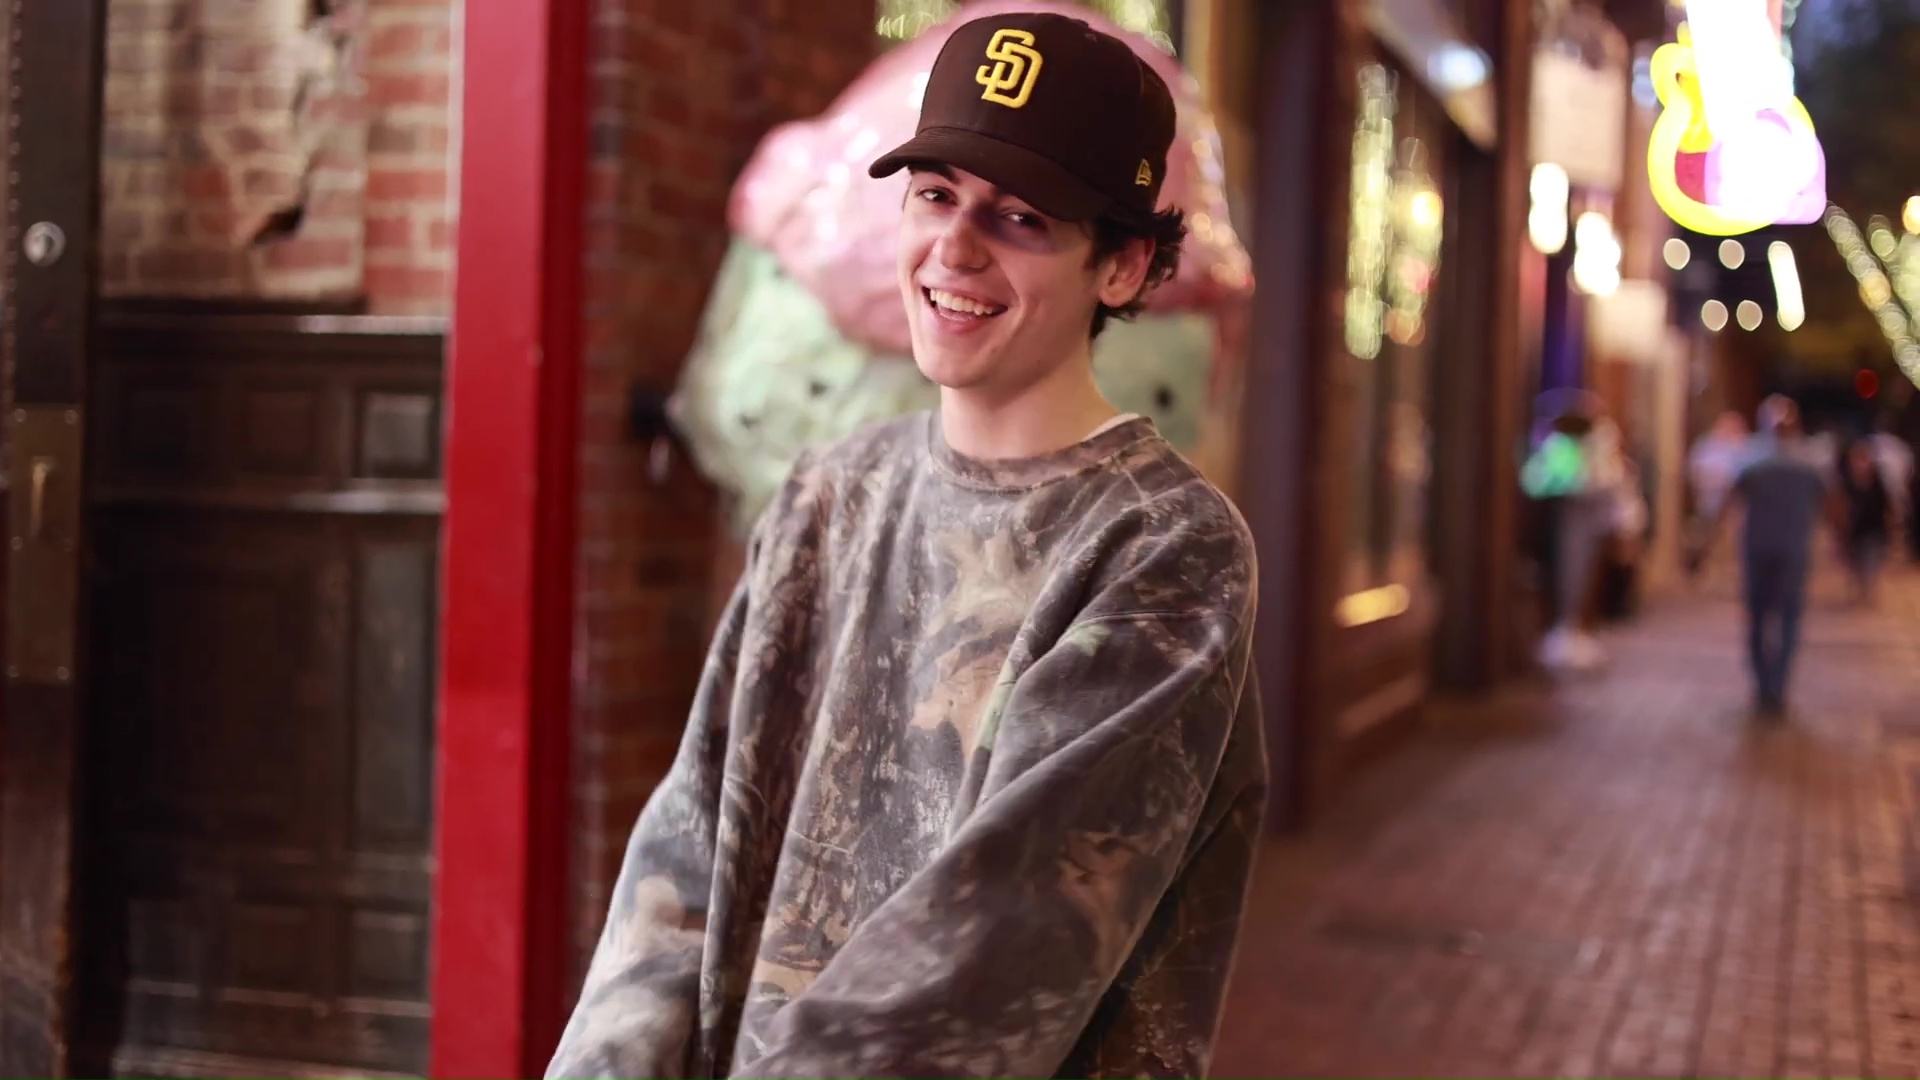 Alex Angelo in Music Video: Did You Get That?